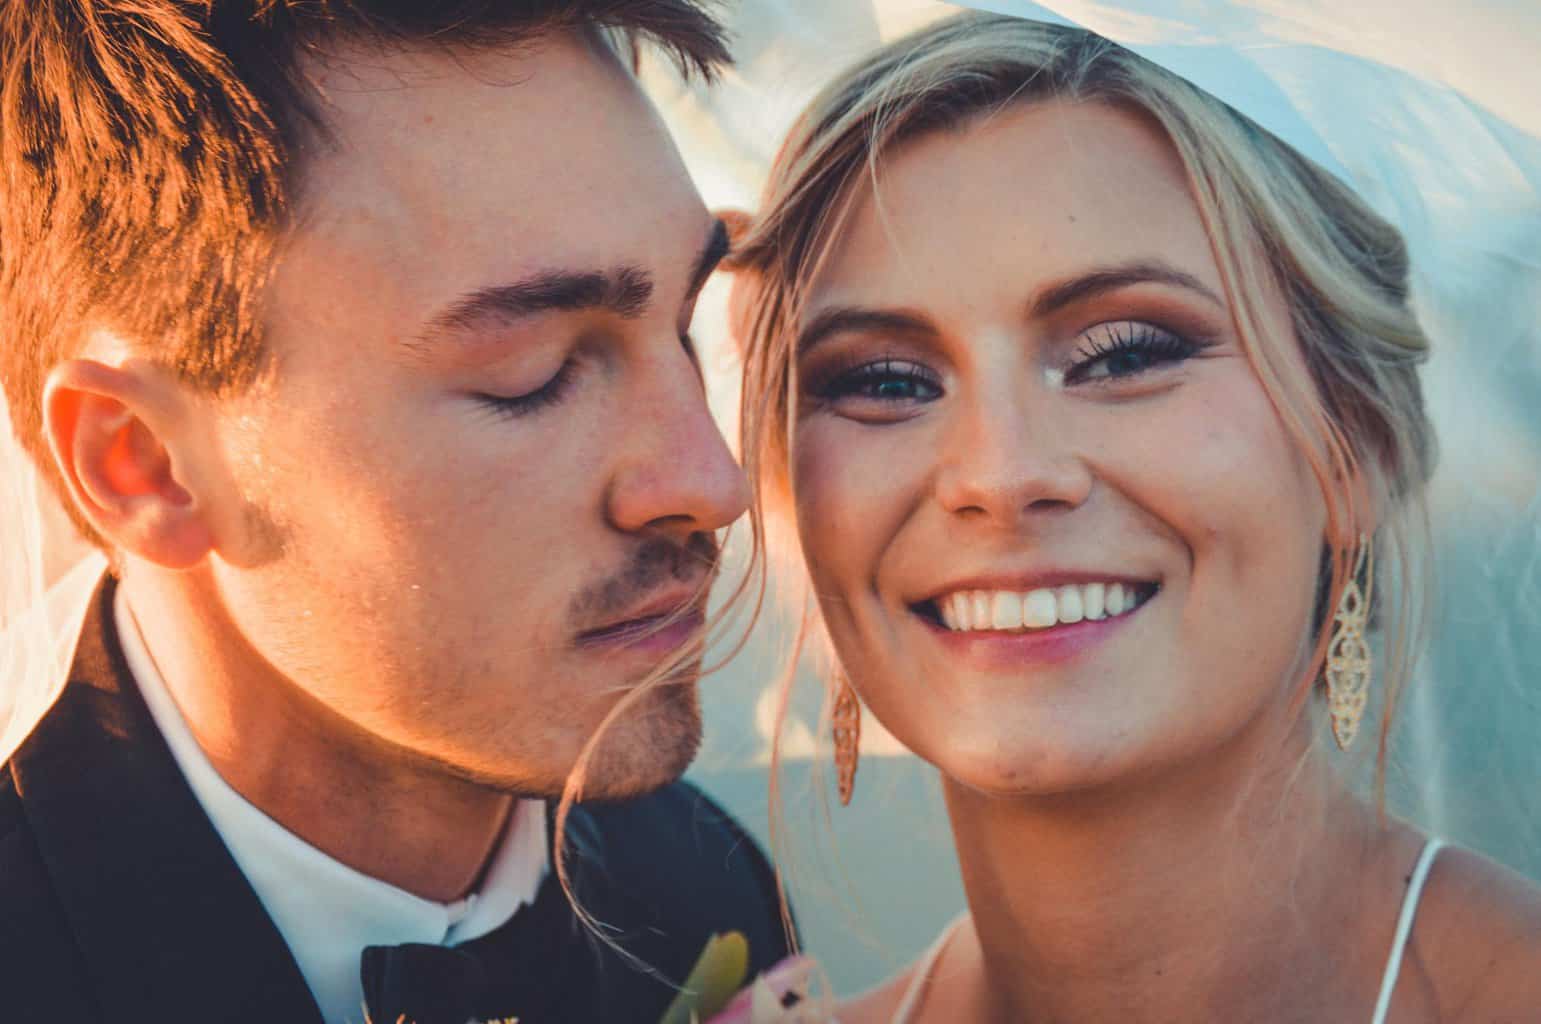 How to Get a Wedding-Ready Smile